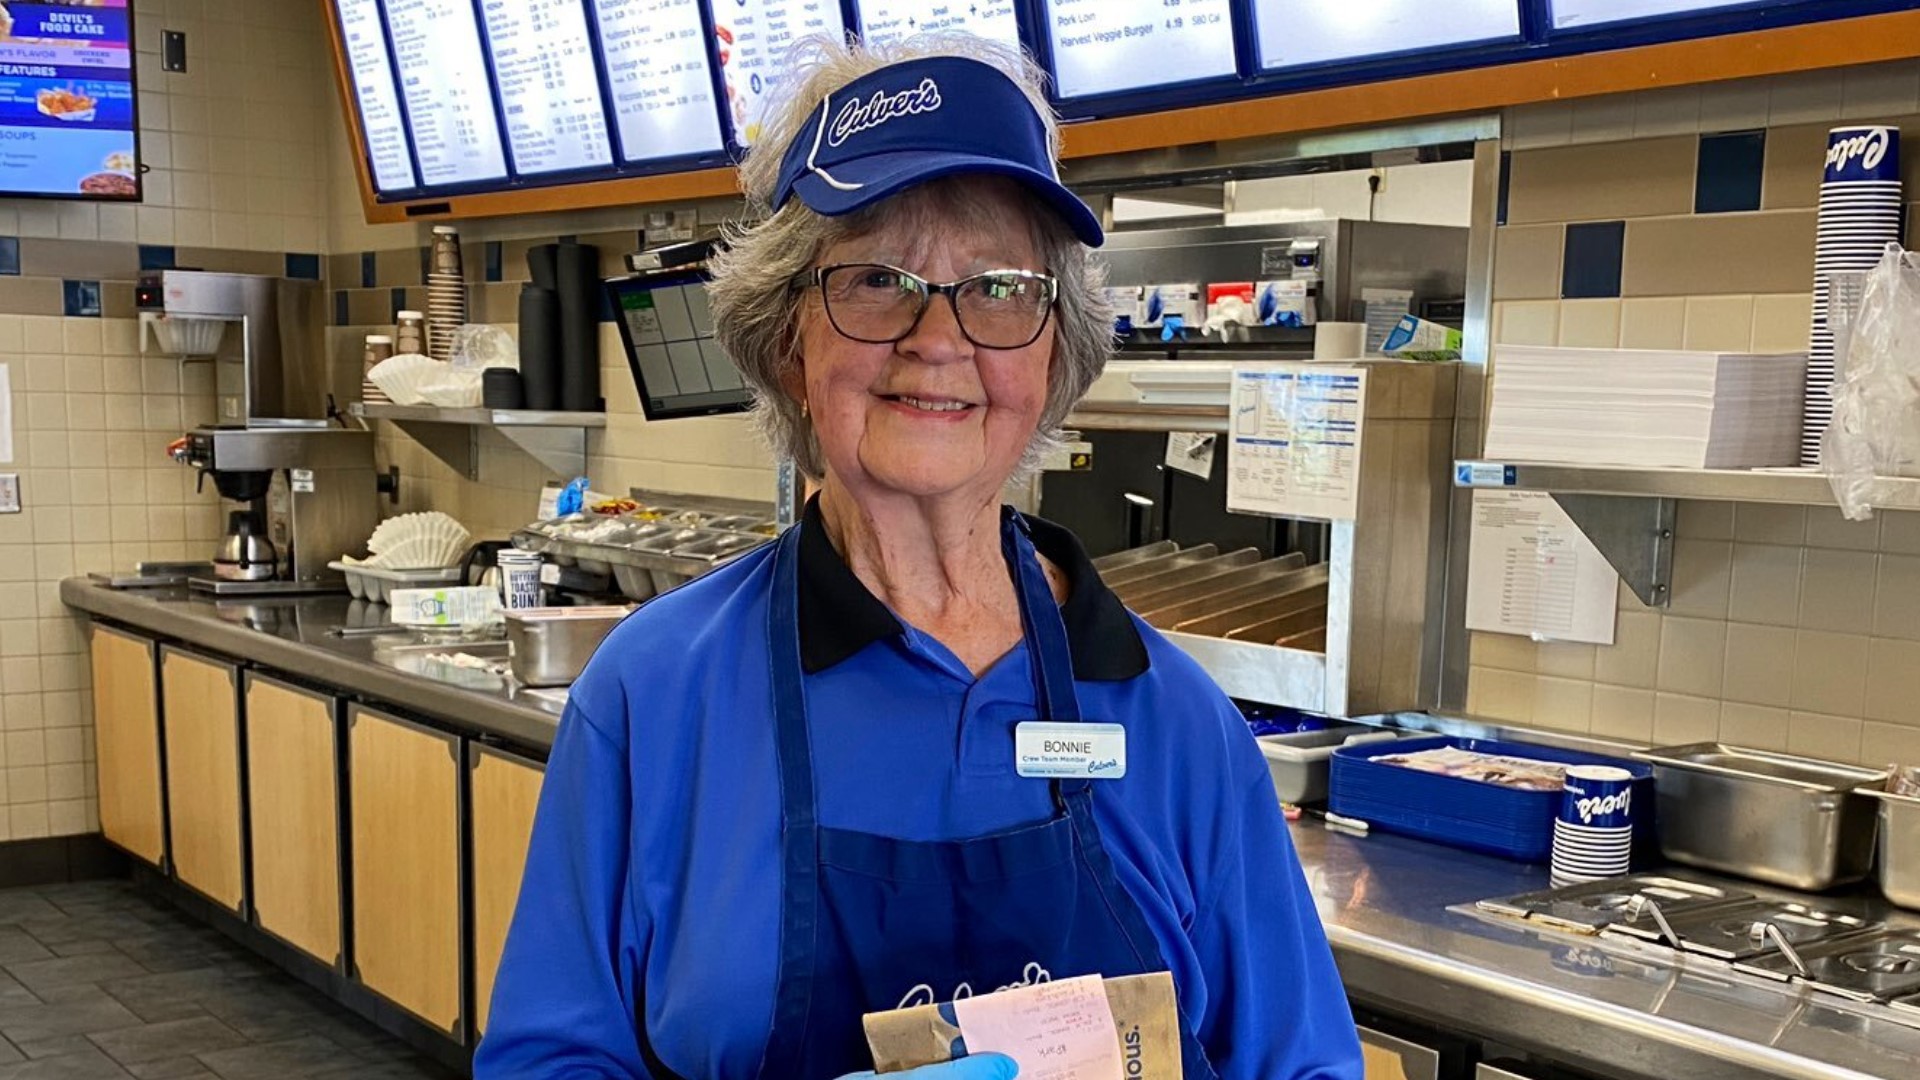 Bonnie August, a Culver's regular, decided to tie up an apron after she learned it was short-staffed